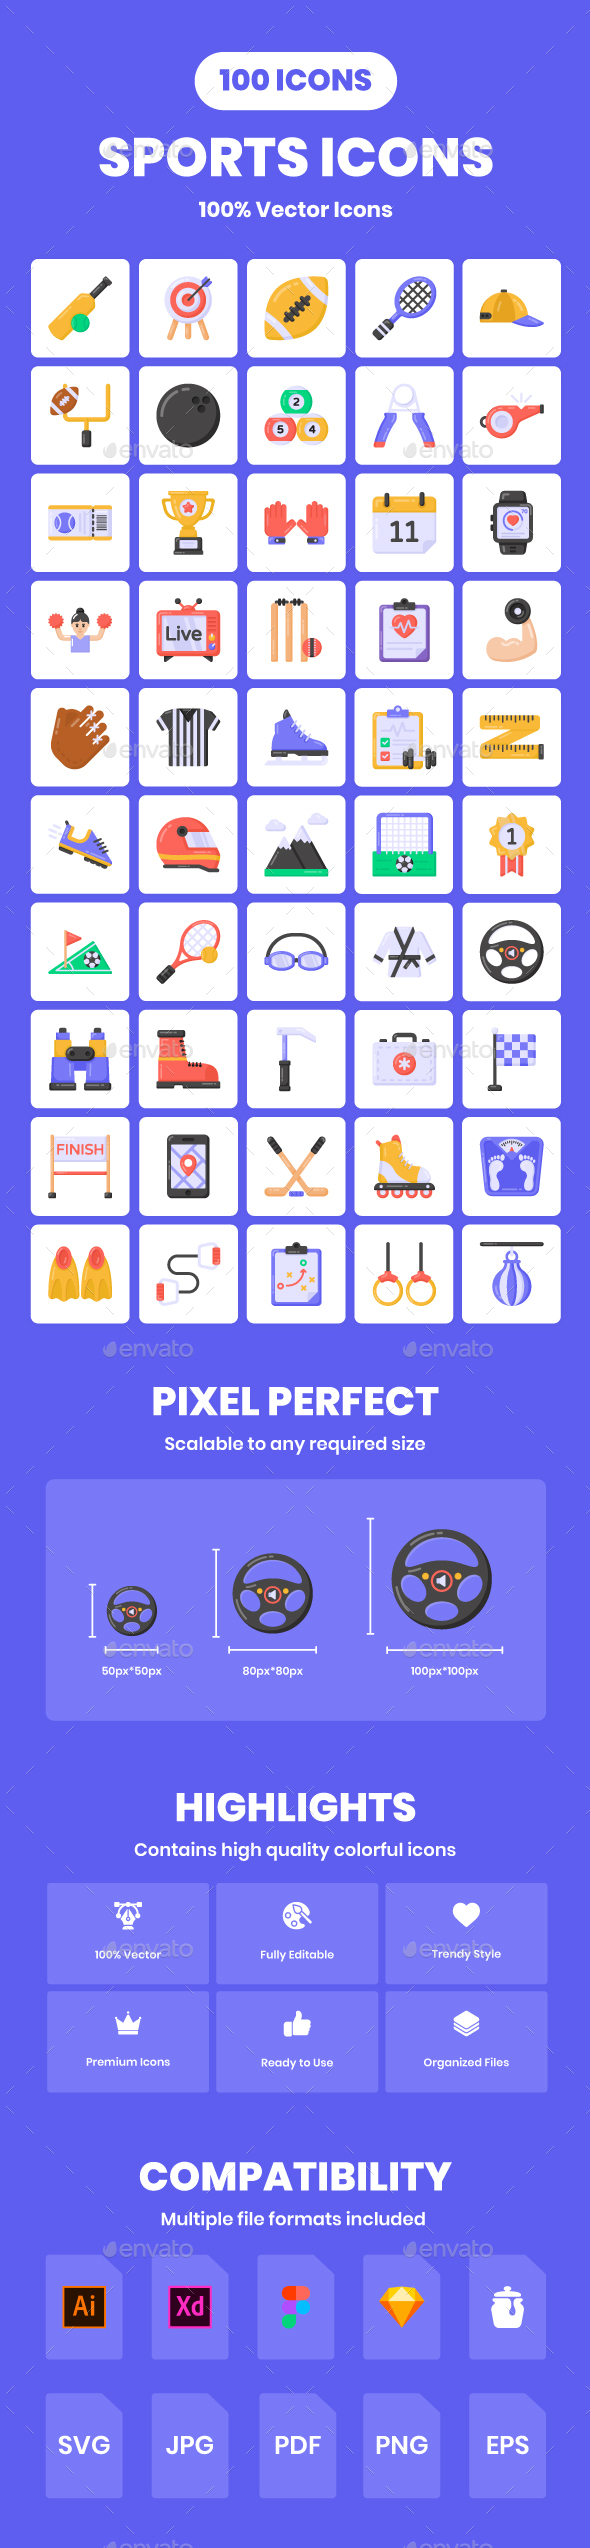 100 Sports Flat Vector Icons